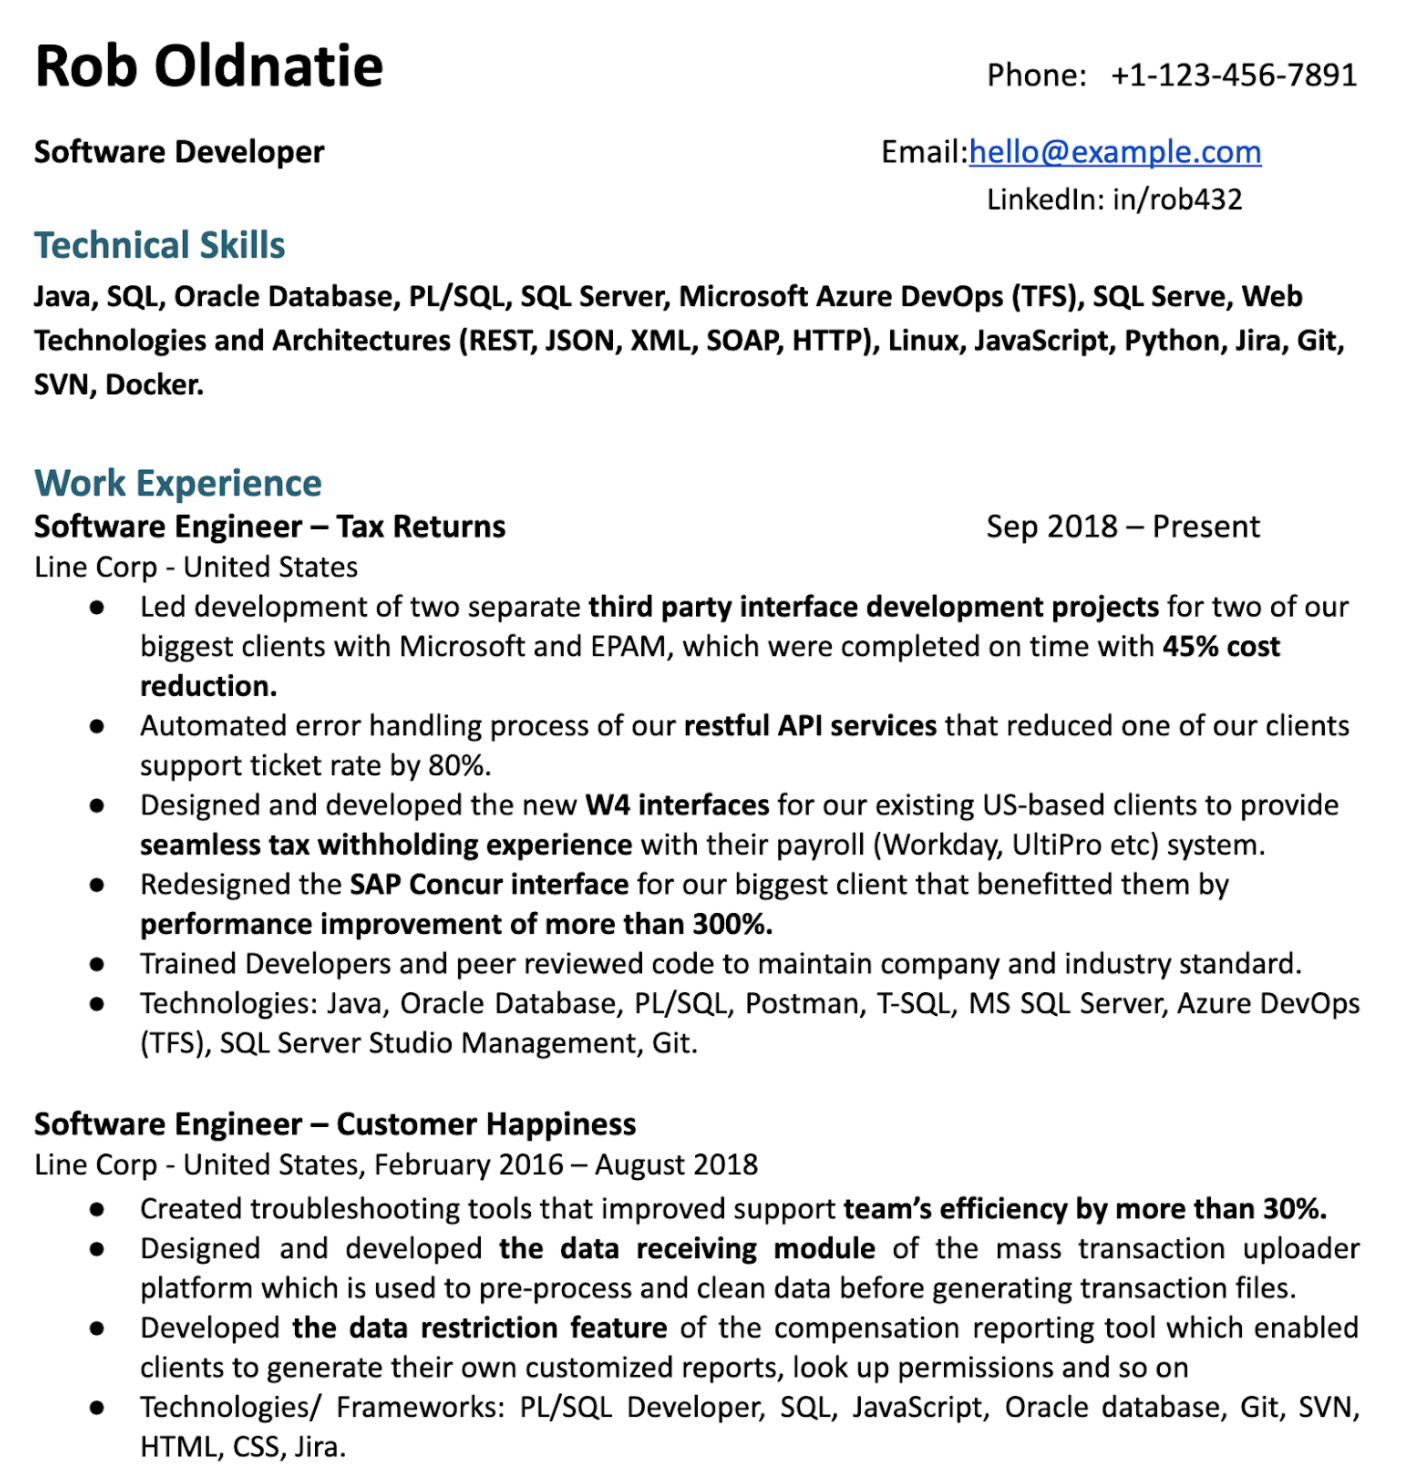 An example of a resume with common mistakes